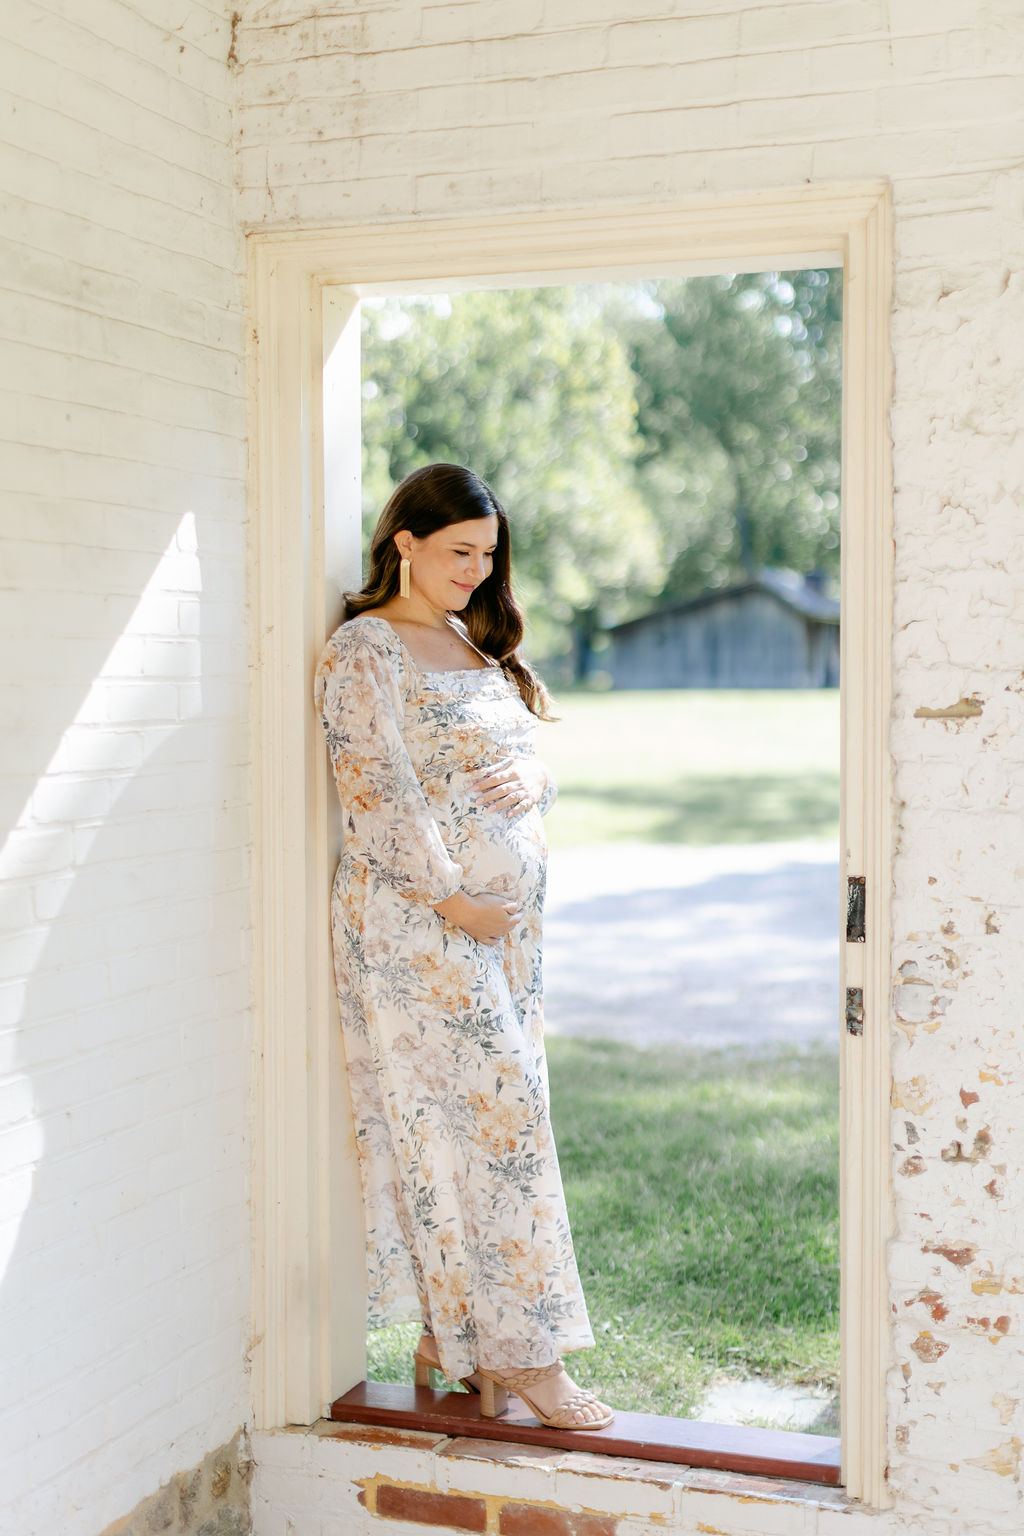 A mother to be in a white floral printed dress stands ina. doorframe of an old building in a park